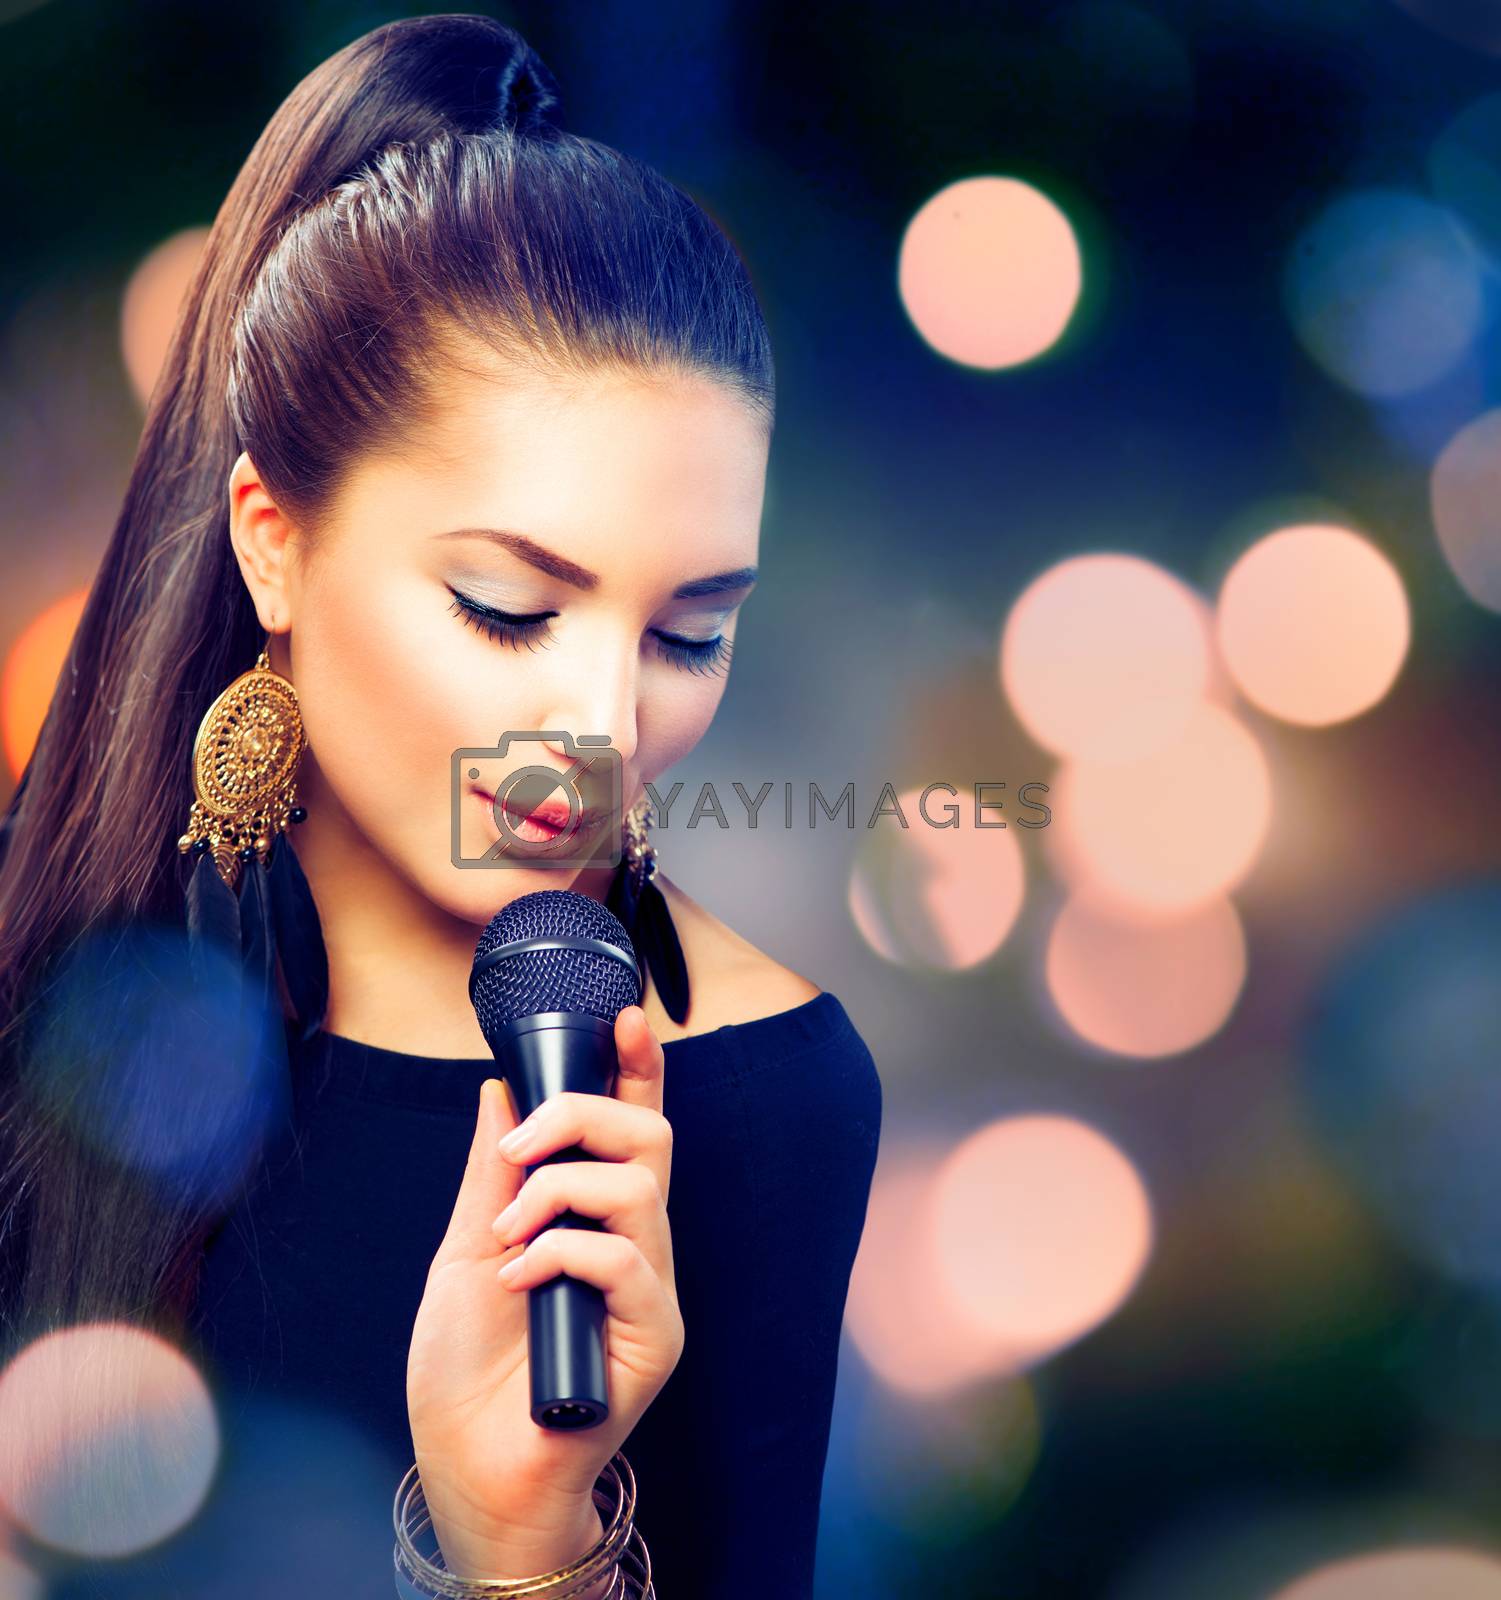 Royalty free image of Beautiful Singing Girl. Beauty Woman with Microphone by SubbotinaA